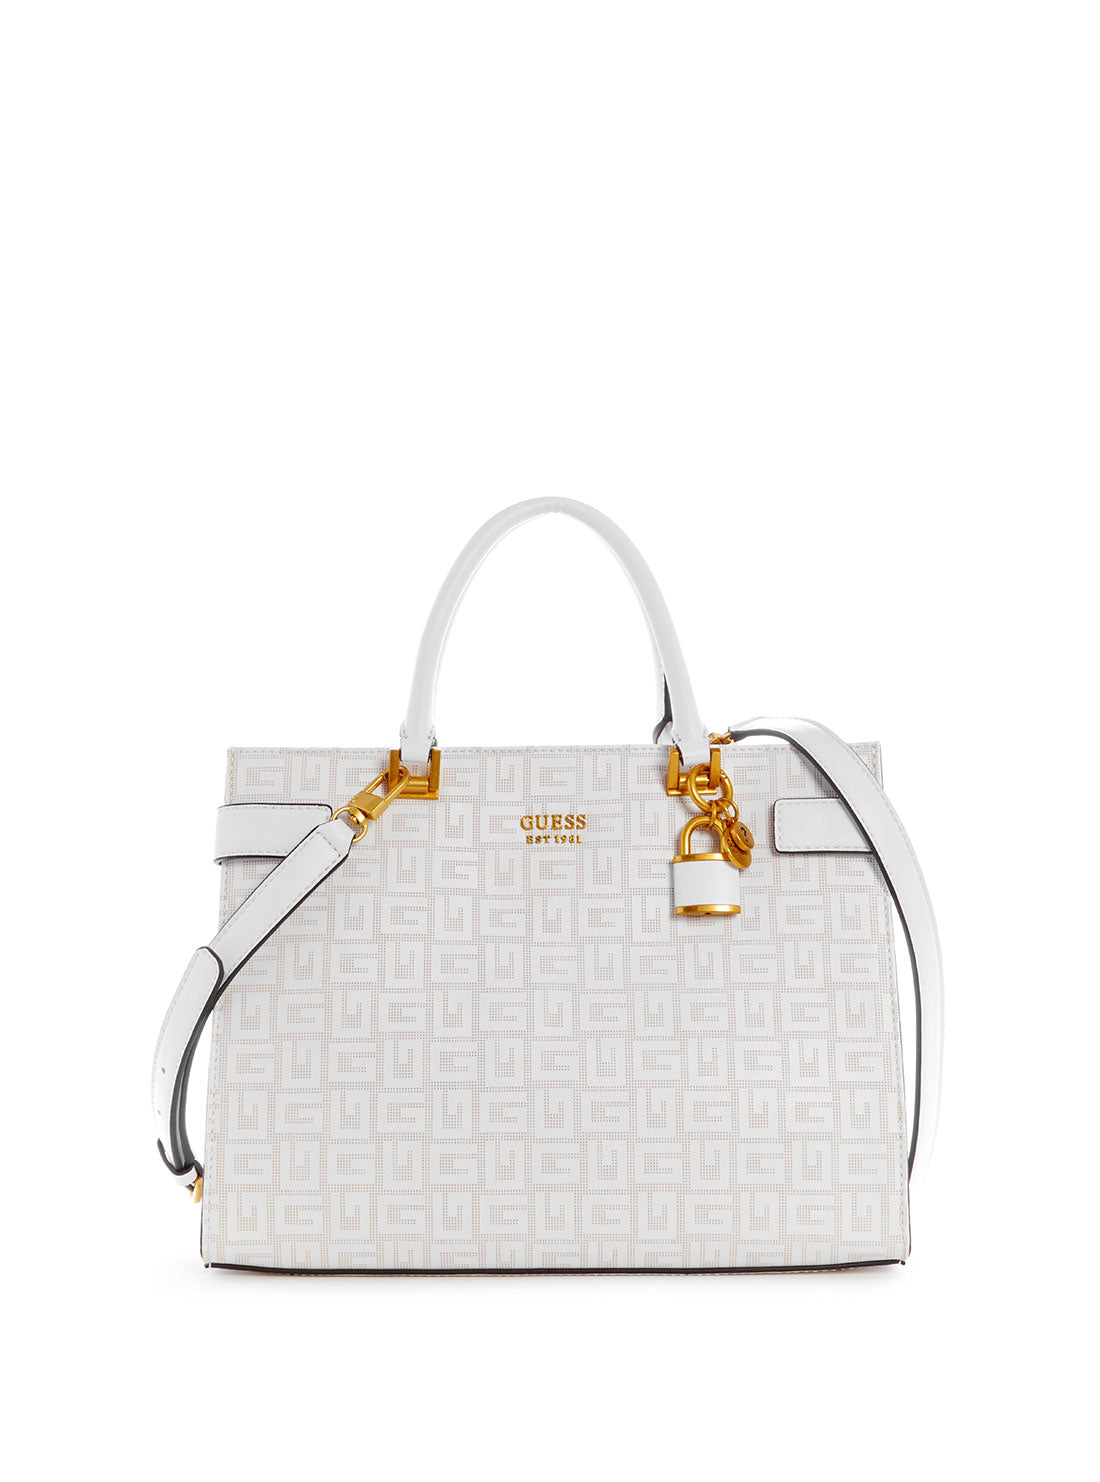 GUESS Womens White Atene Society Satchel XA841906 Front View